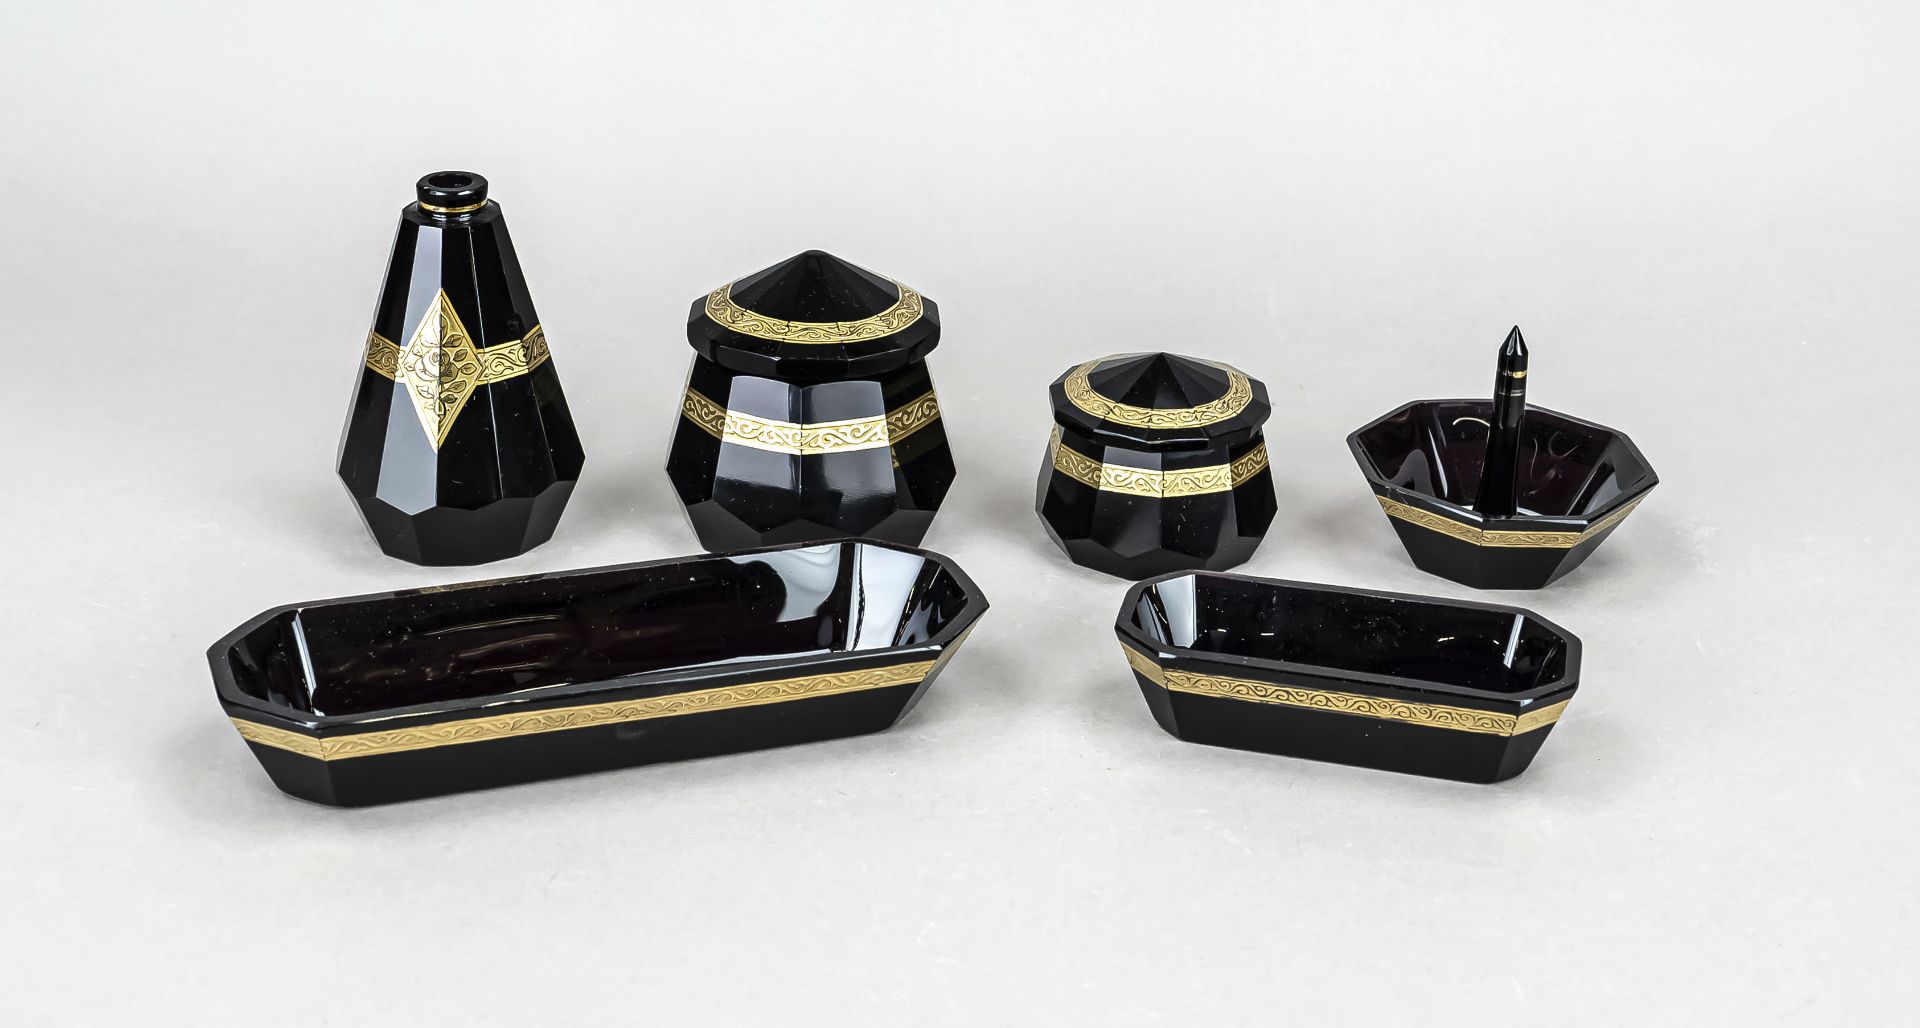 Six-piece toiletry set, 1st half 20th century, Moser (?), dark violet glass with gold decoration,